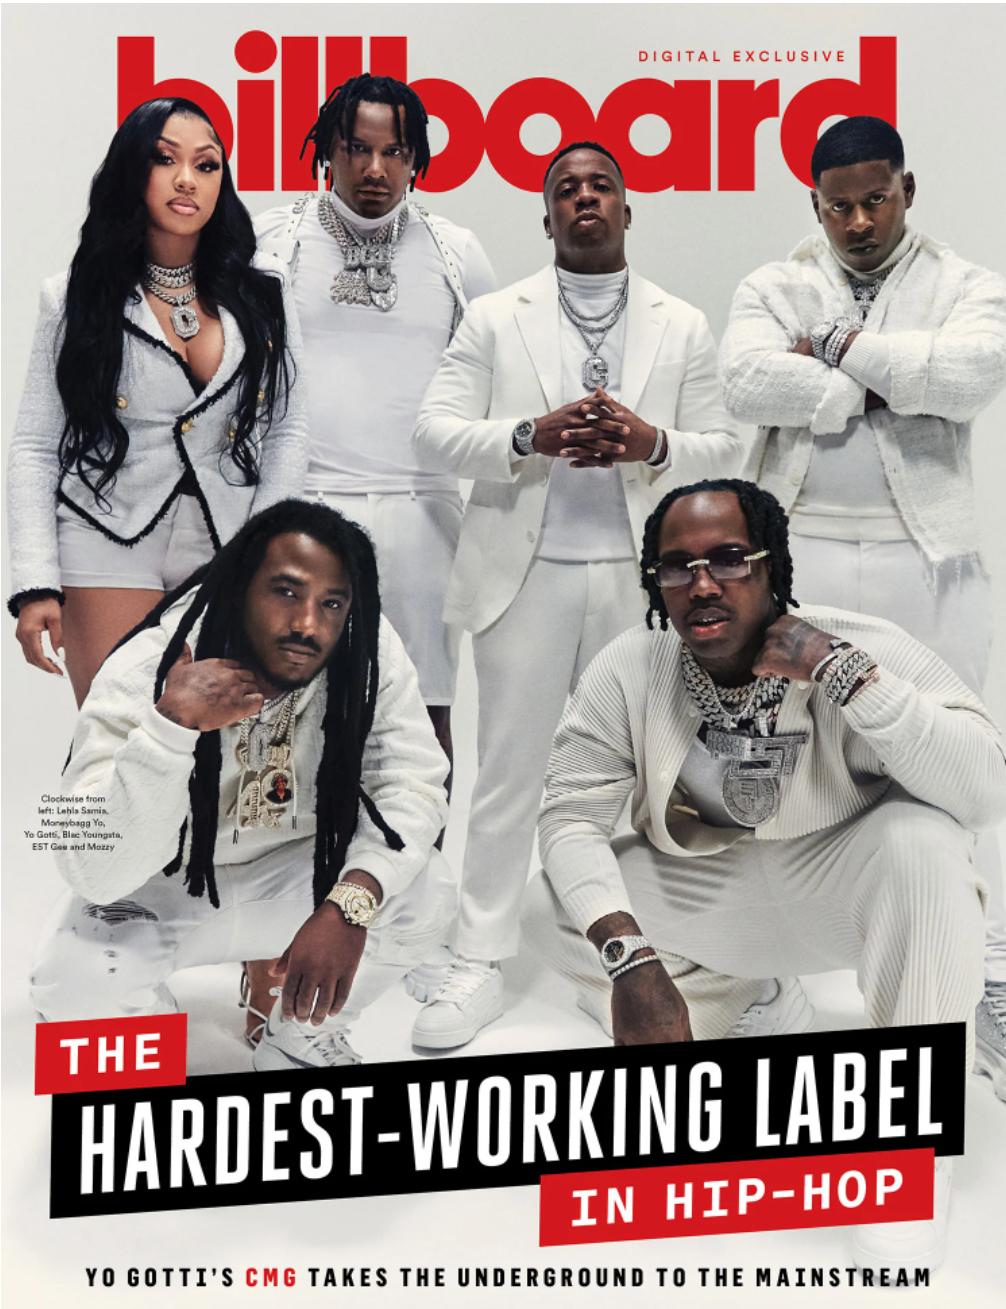 THE HARDEST WORKING LABEL IN HIP-HOP: INSIDE THE RISE OF YO GOTTI AND COLLECTIVE MUSIC GROUP